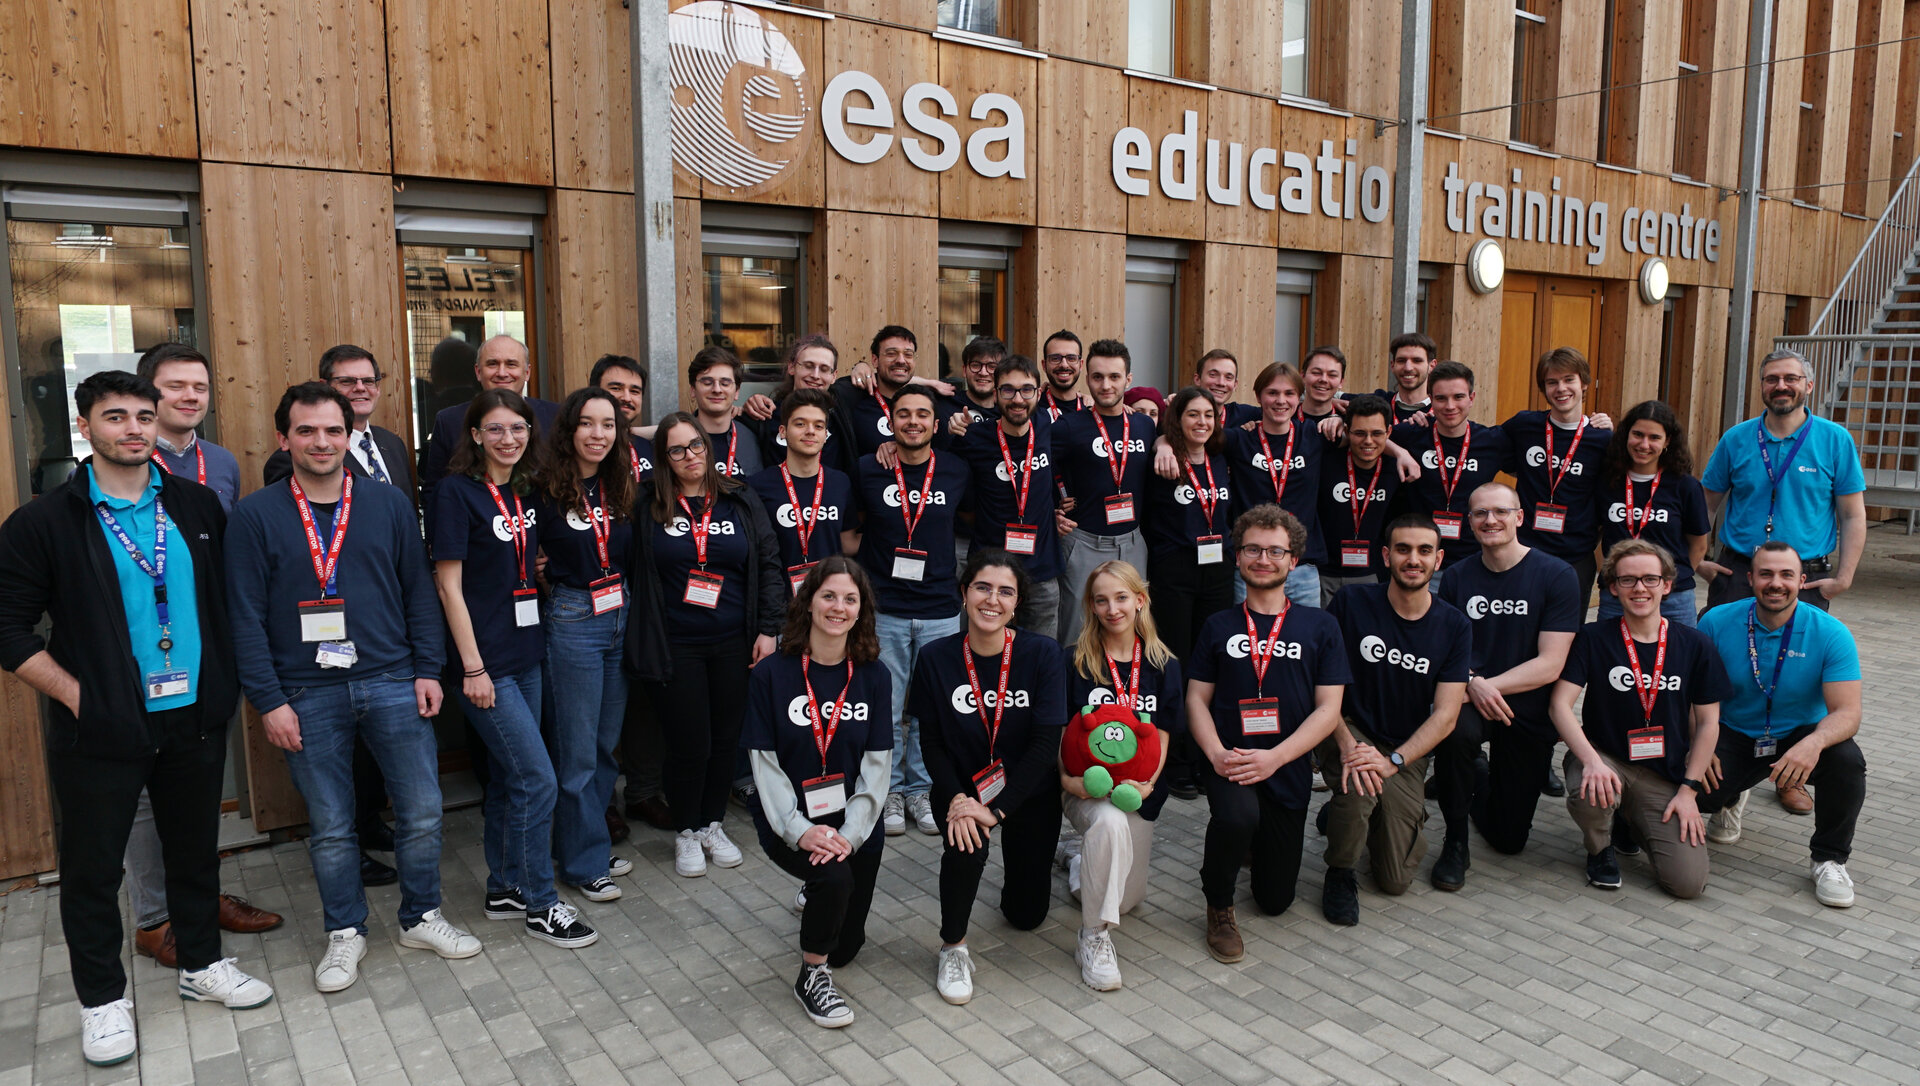 Group picture of university students at ESA Education Training Centre, Belgium